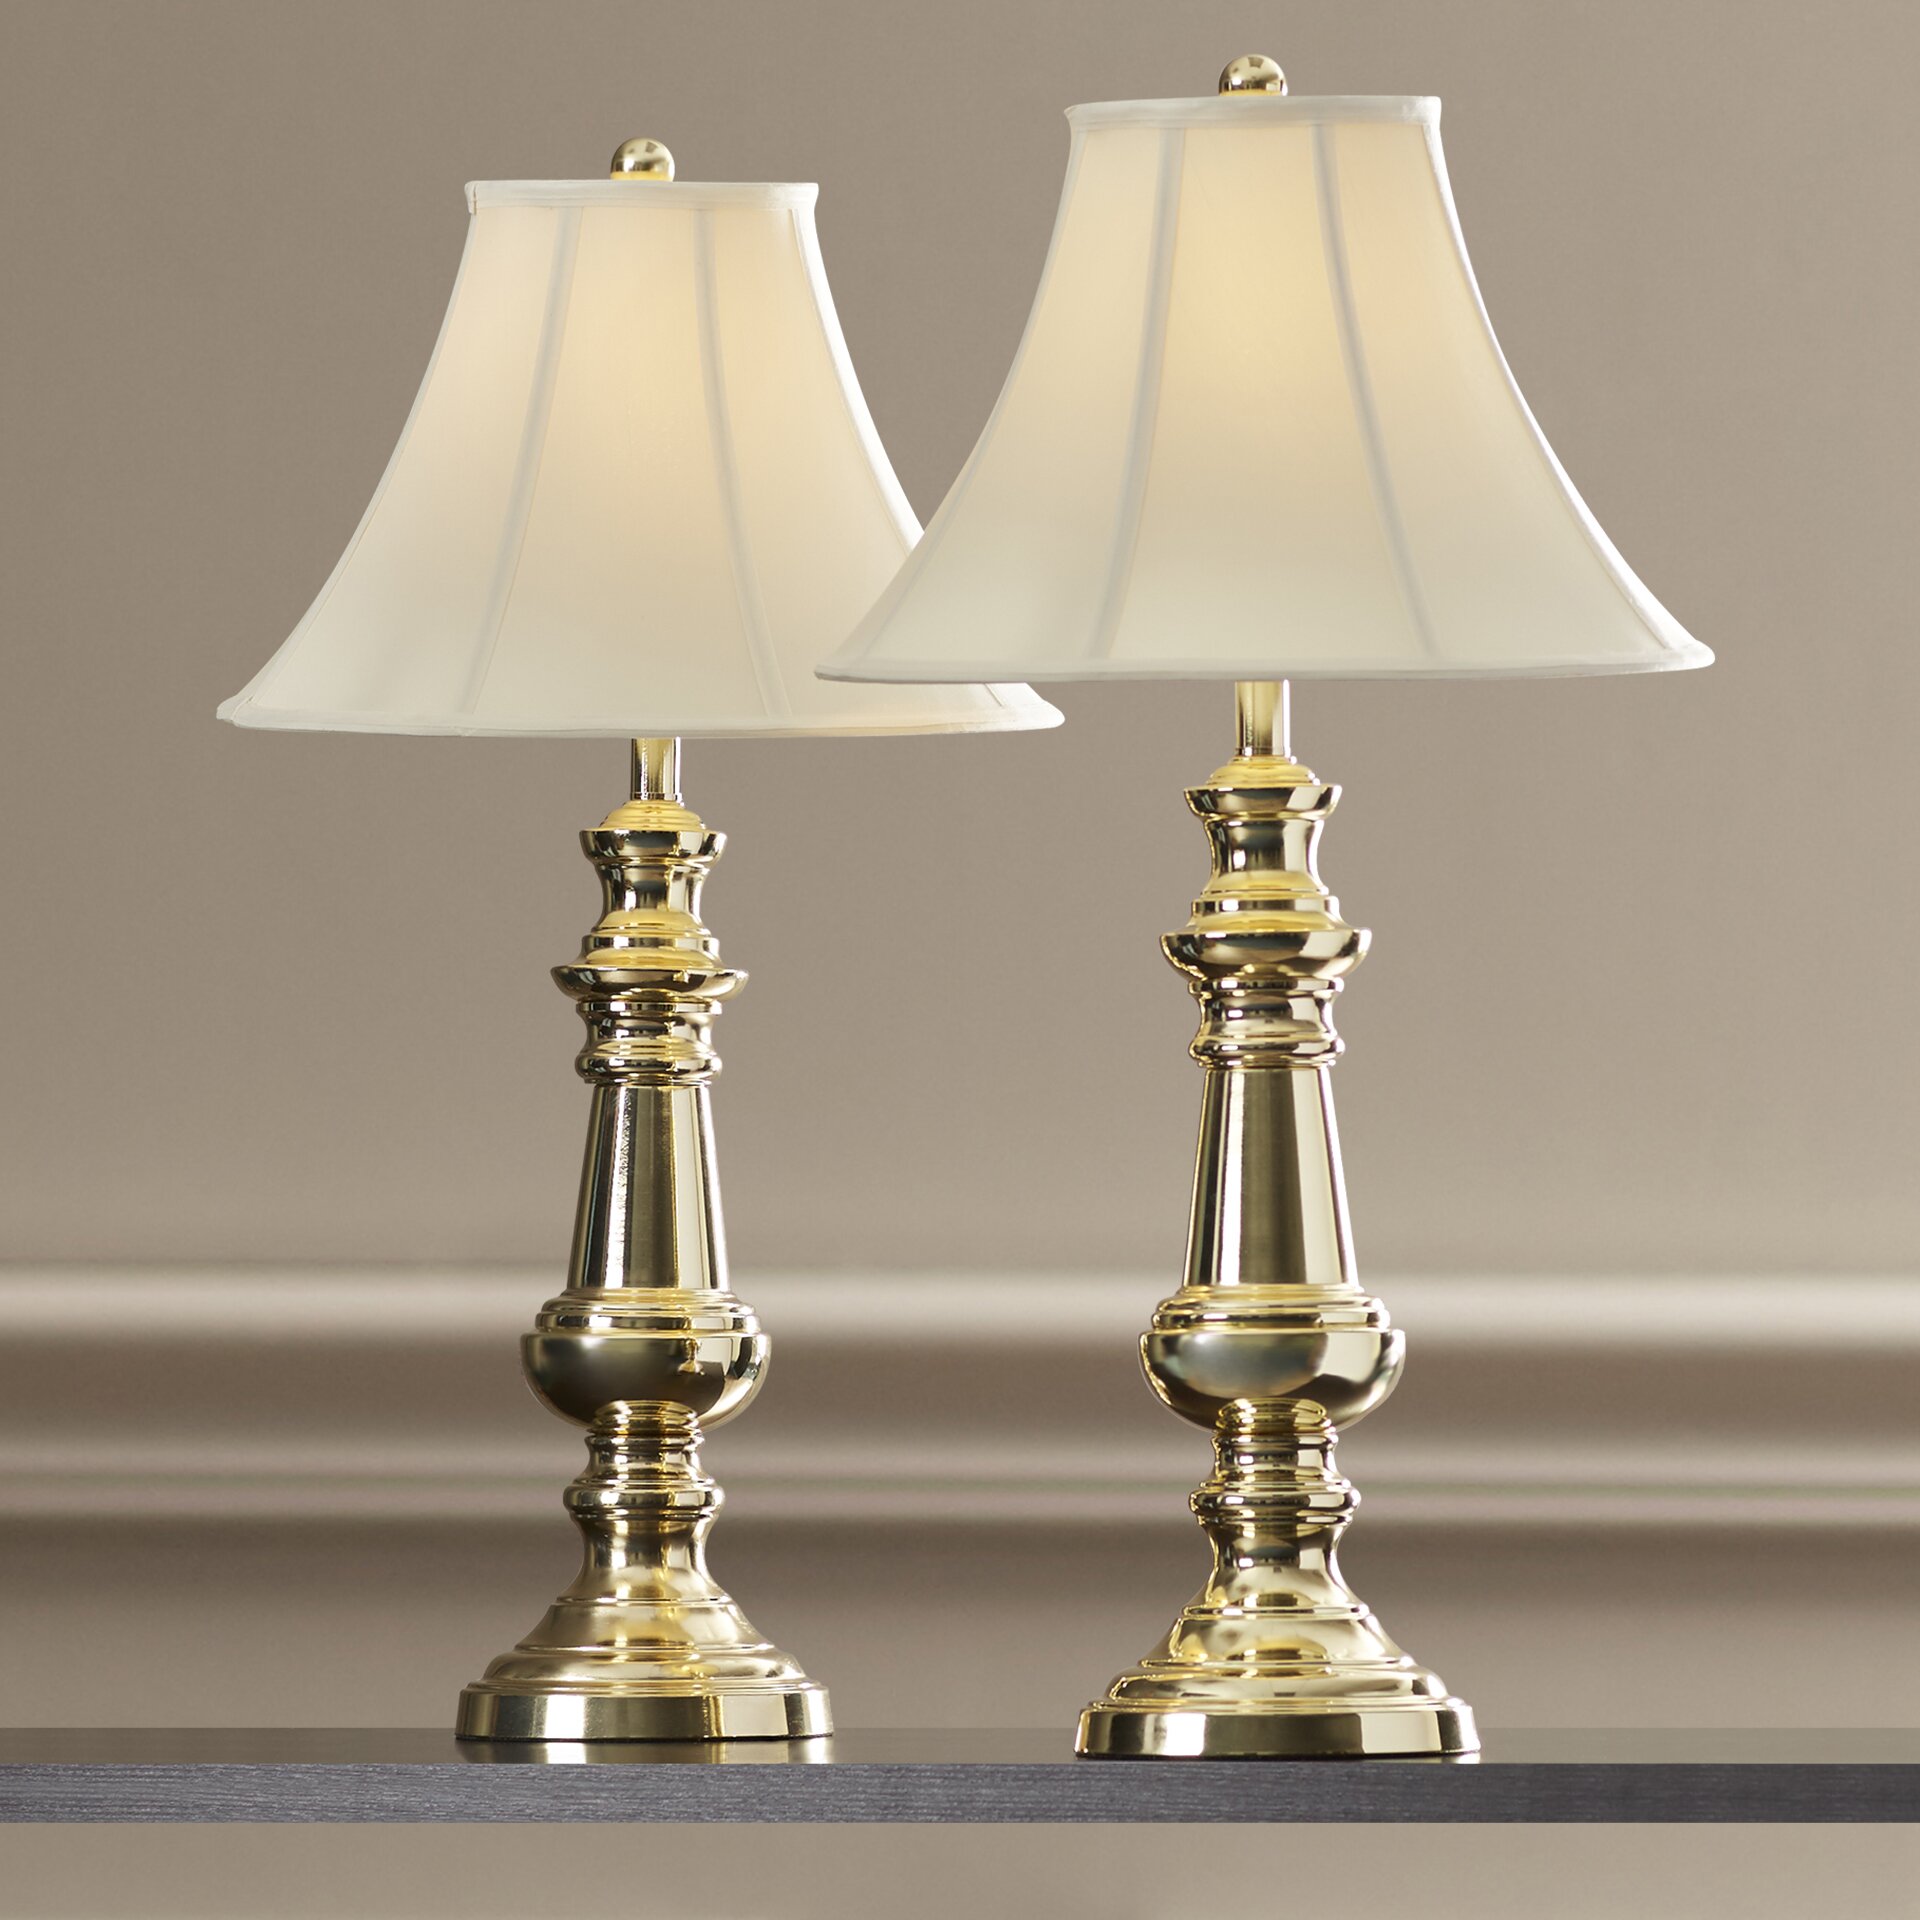 Marmon Polished Brass 32 H Table Lamp With Bell Shade ANDO2975 